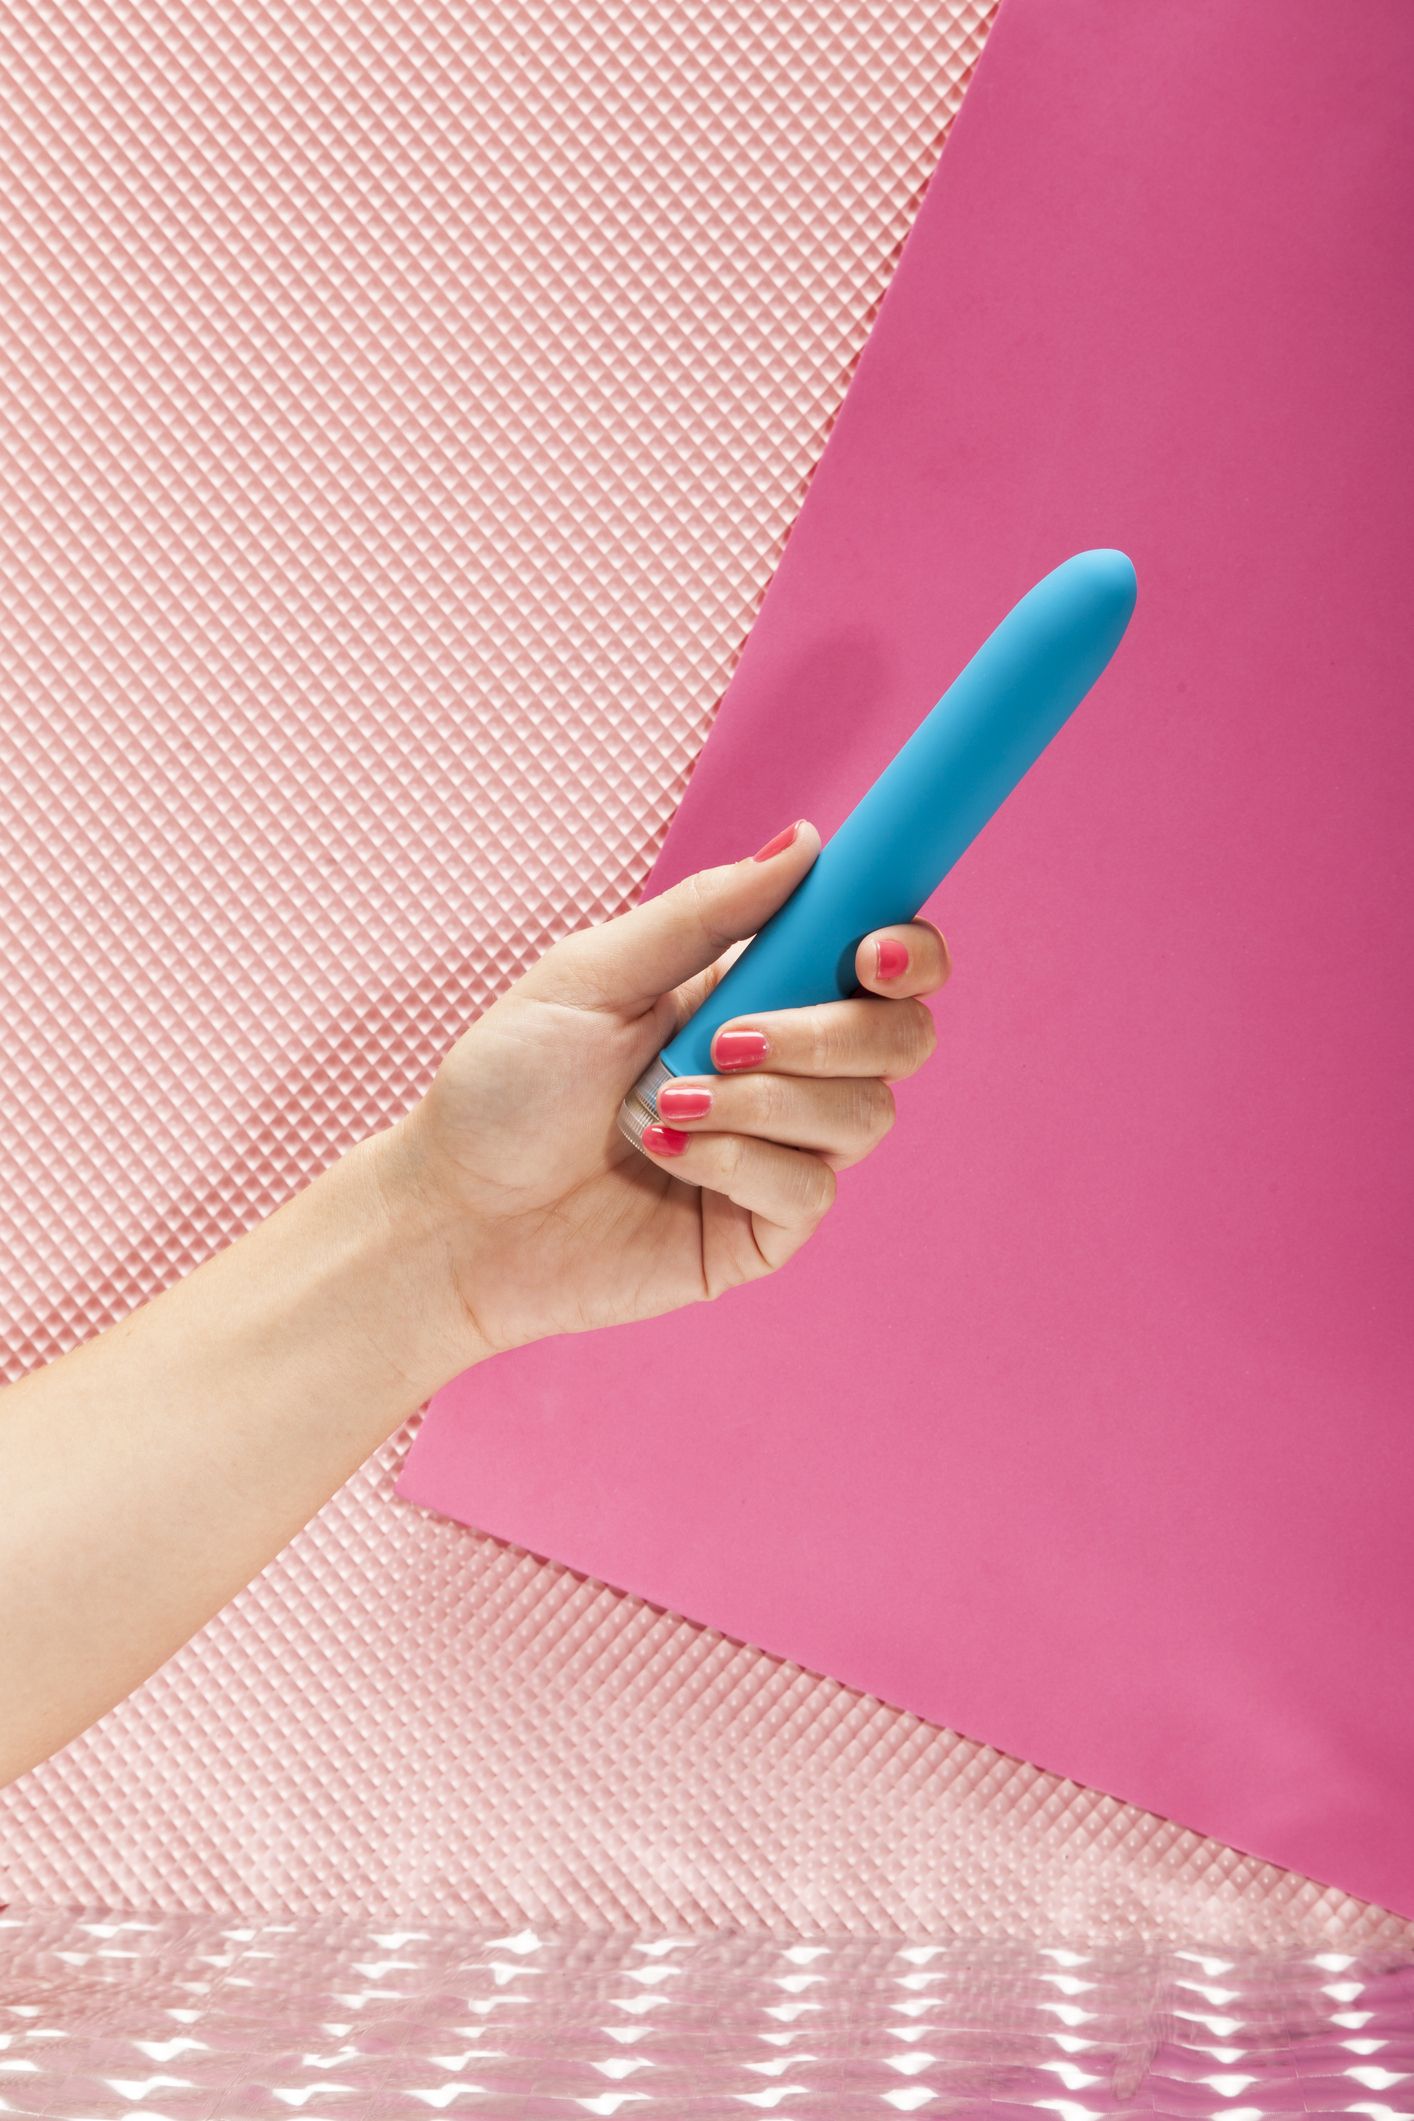 How to Clean Sex Toys, According to the Experts (It's More Involved Than  You Might Think)